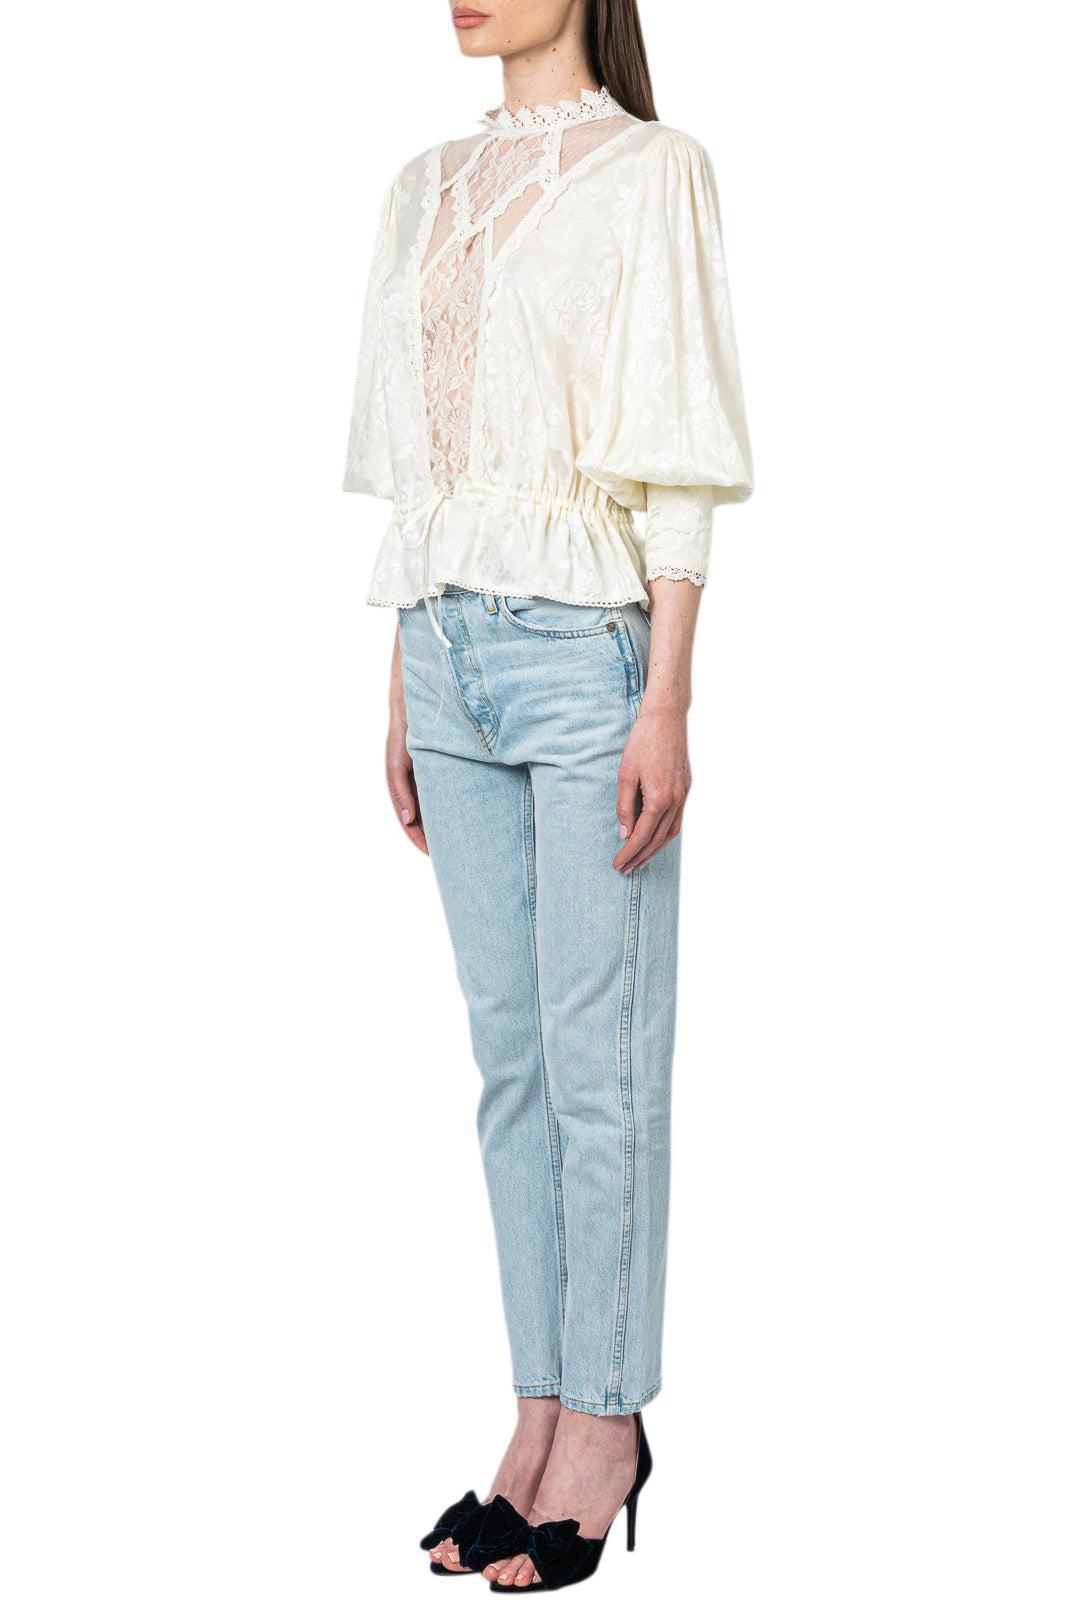 By Timo-Ruffled floral tulle blouse-2110702-dgallerystore